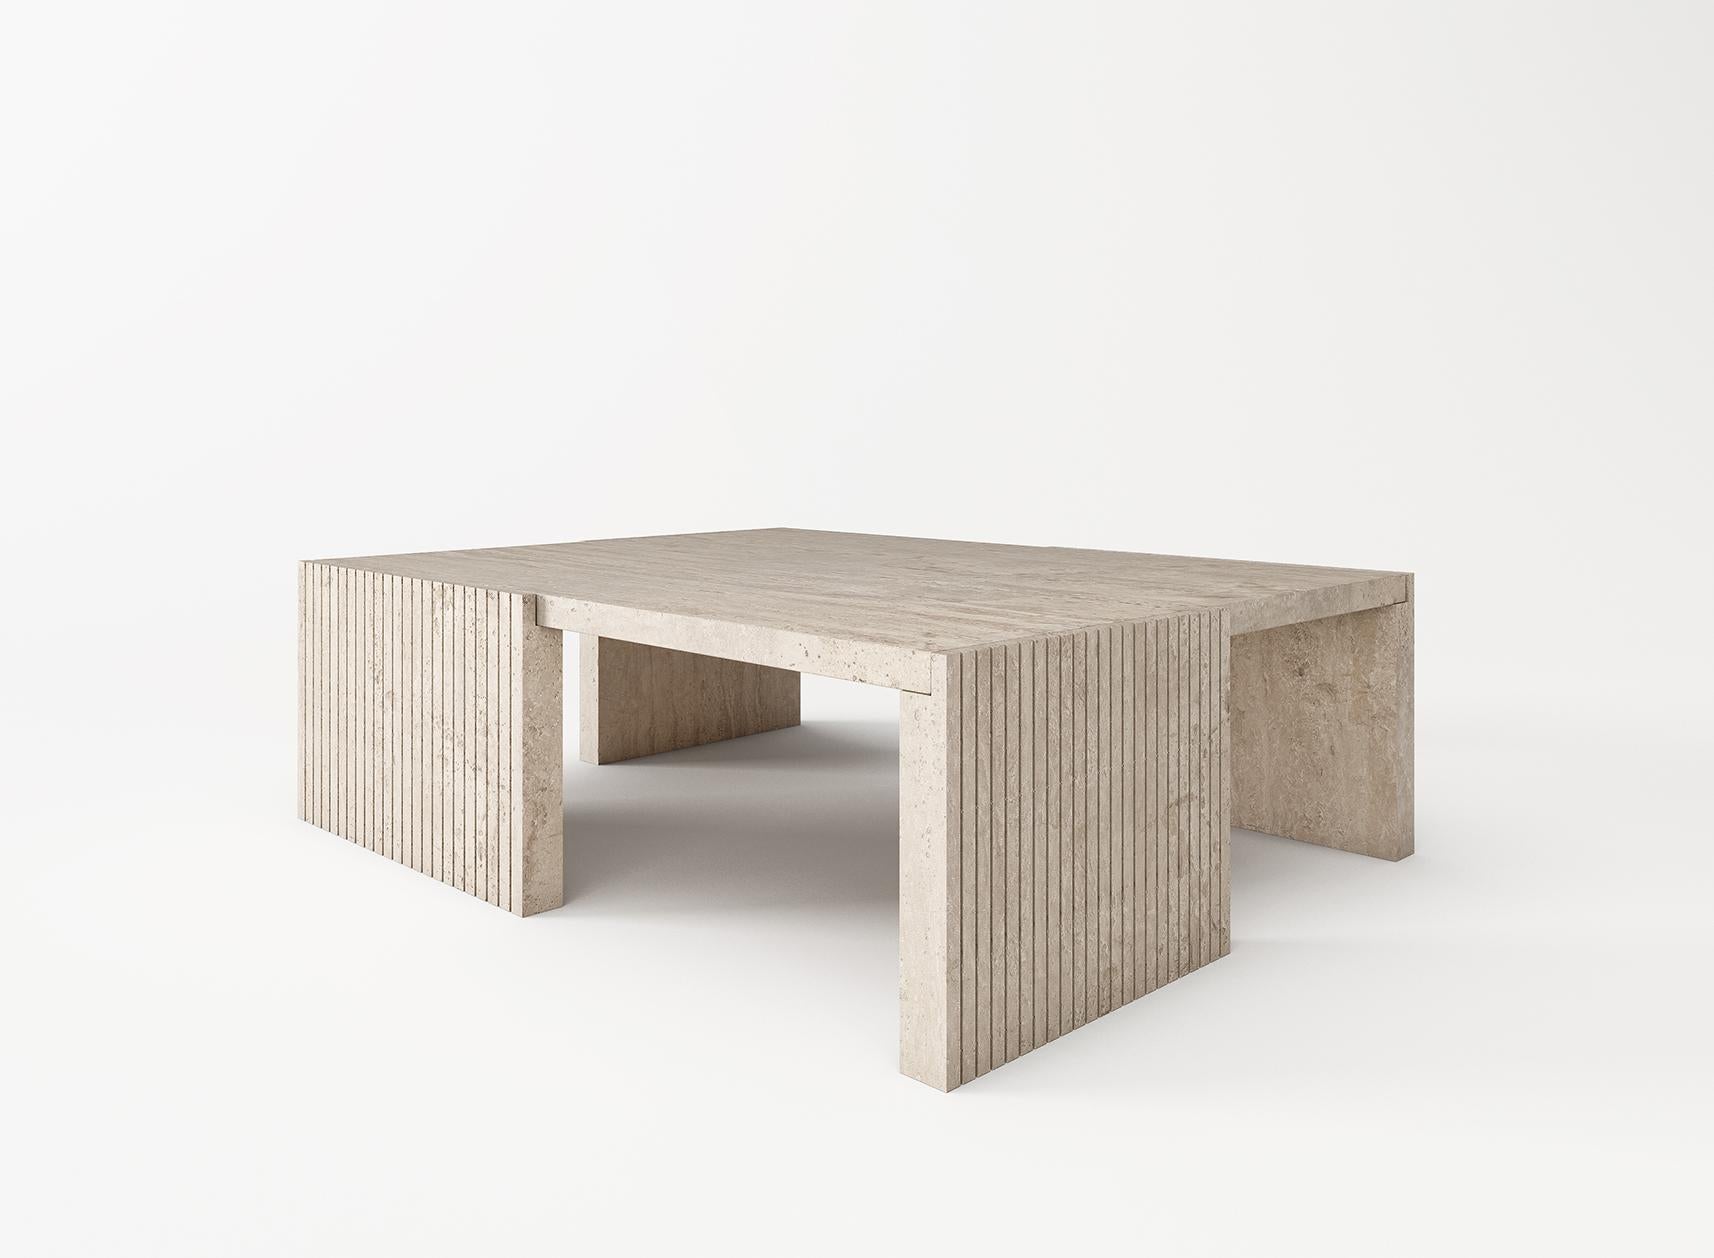 QUATTRO
Unfilled solid travertine coffee table.
Reinterpretation of 1970s Italian coffee table designs.

Available in different colors of travertine and custom-sizing.

Designed by Buket Hoscan Bazman 
 